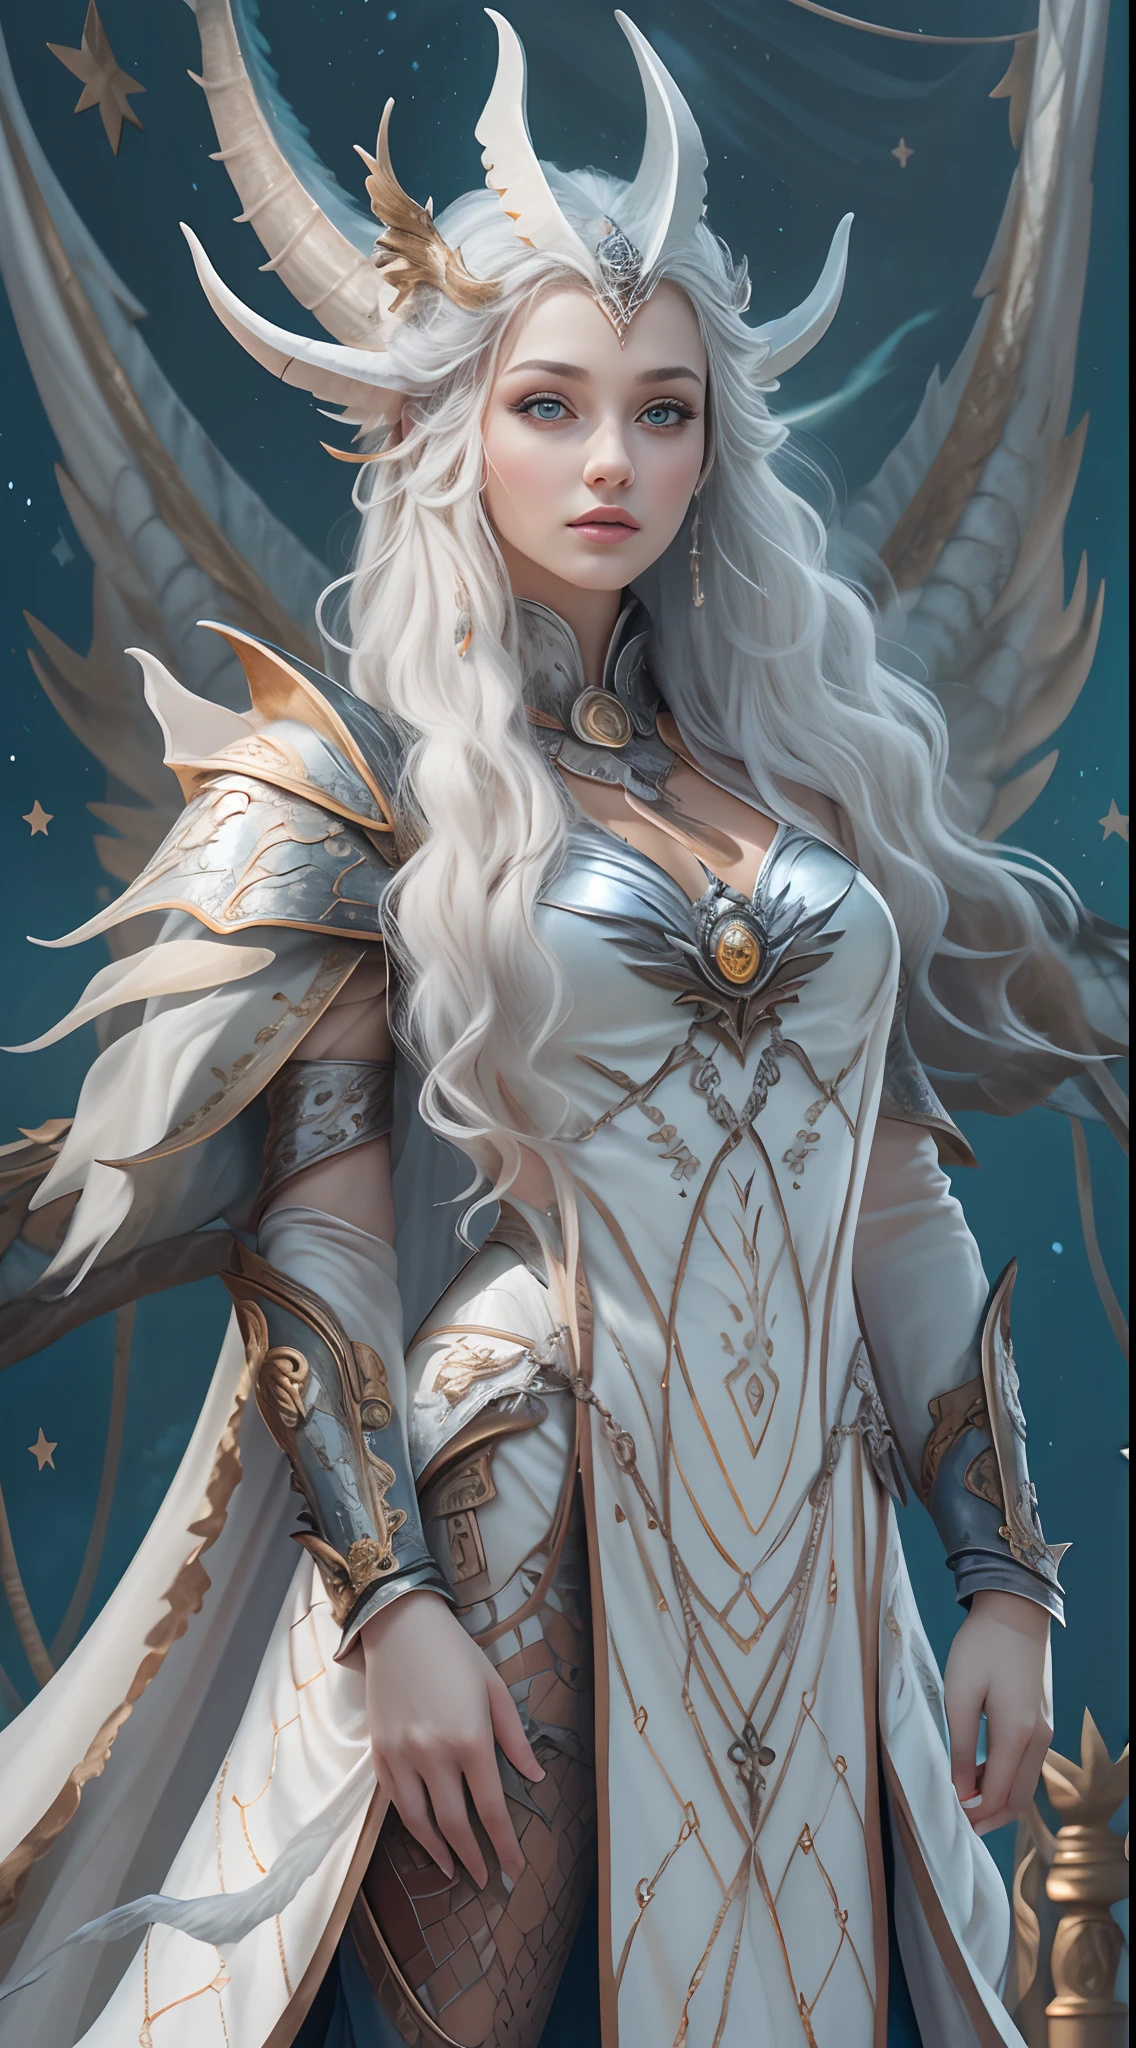 unreal engine:1.4,UHD,The best quality:1.4, photorealistic:1.4, skin texture:1.4, Masterpiece:1.8,White Dragon Queen, young and mature woman, Long elf ears, elegant dress, big chest, curve, Dragon Ling Vawy Hair, super long hair, Smooth Face Features, White dragon horns on his head, majestic woman, silver decoration om your dress, Silver Star Queen,big blue eyes, Cherry Lips, white dragons:1.4, starry sky,detailed hands:1.4,